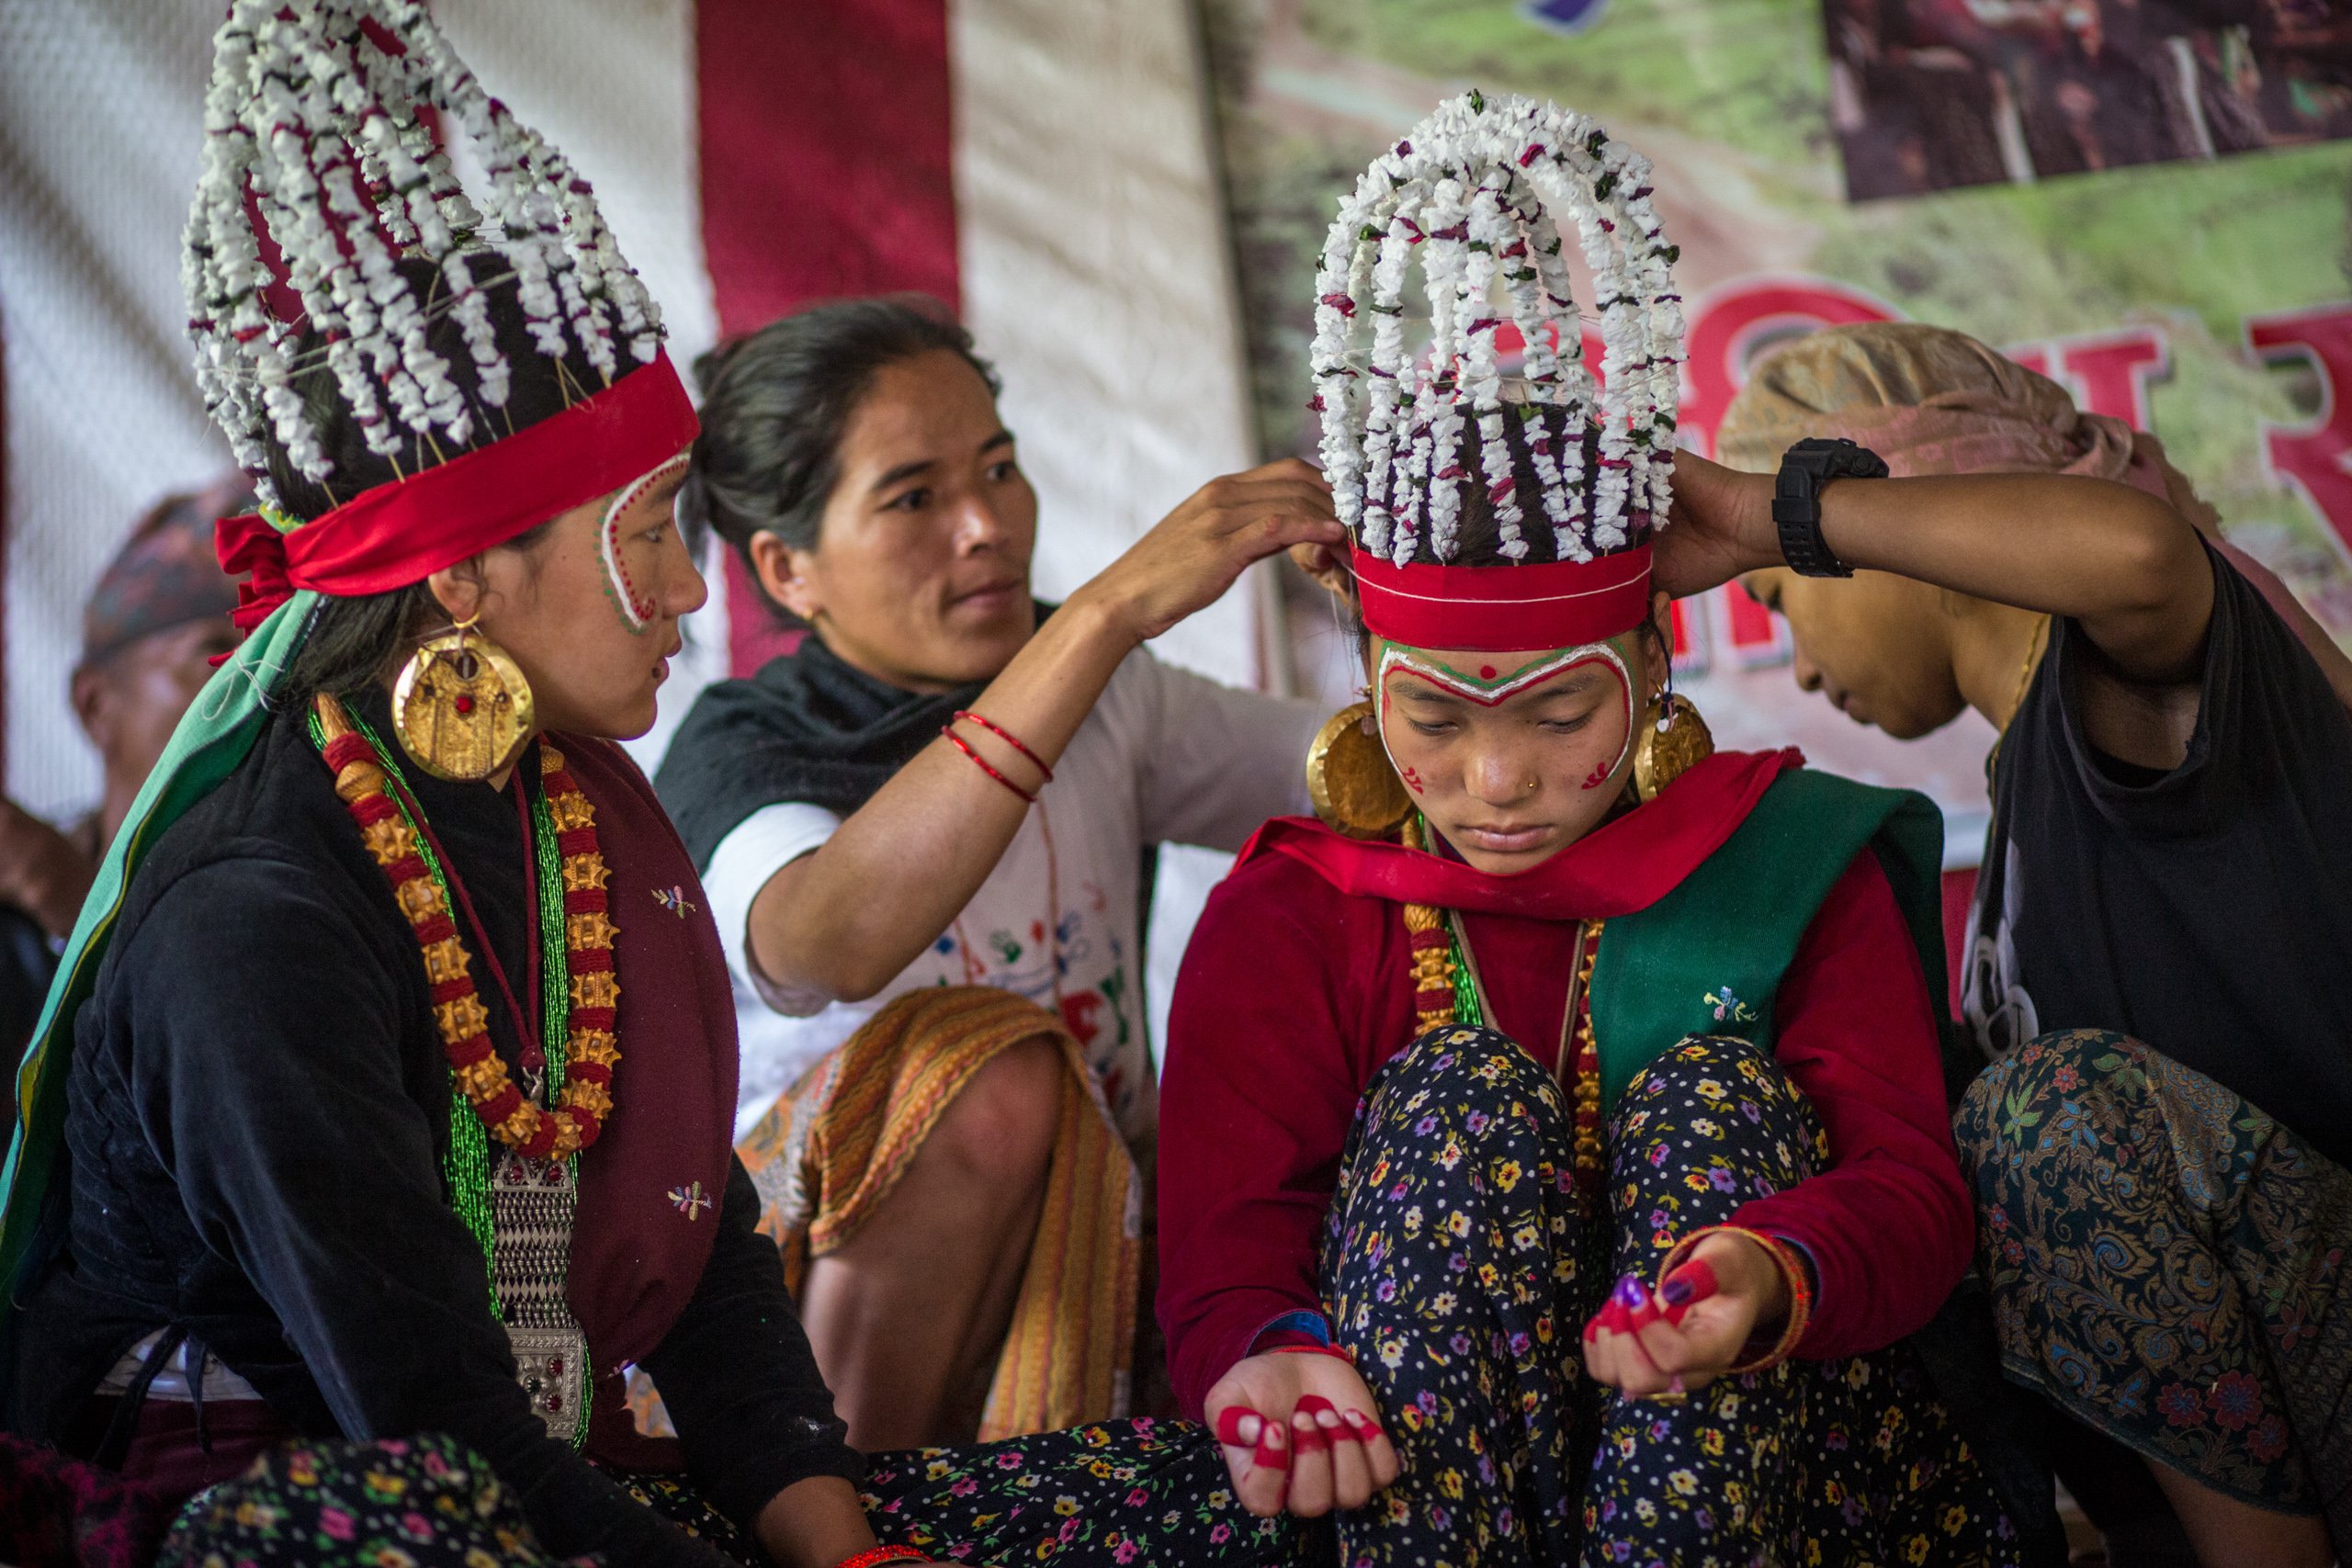 Women in Naiche prepare young girls for Ghatu, a dance performed during the Baishak Purnima full moon festival – one of the biggest festivals in Gurung culture